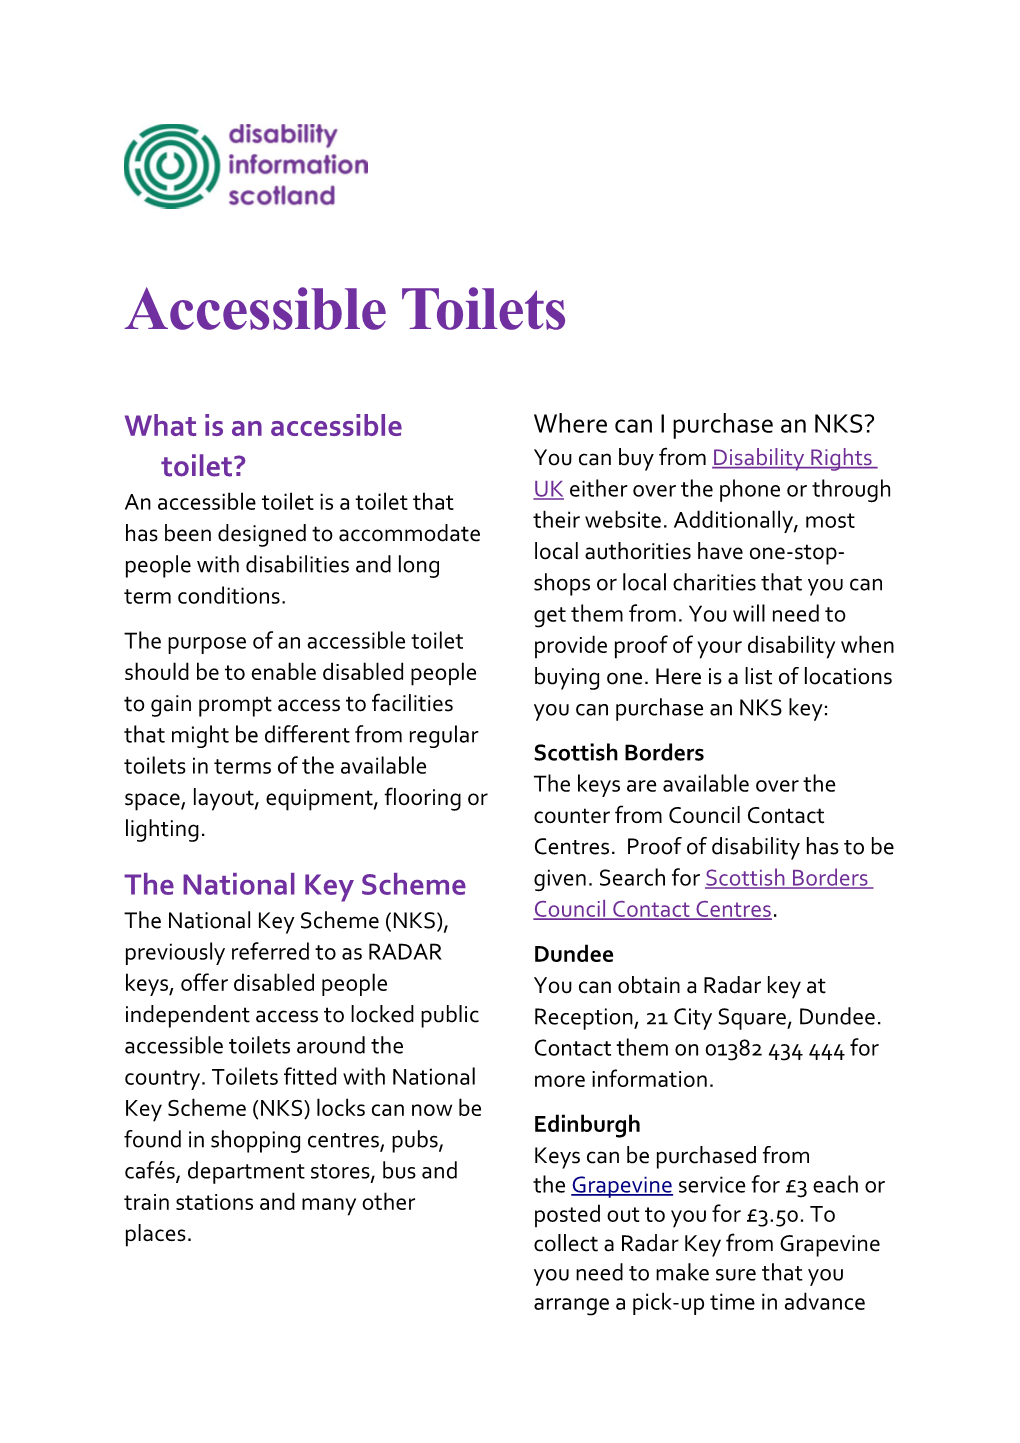 What Is an Accessible Toilet?